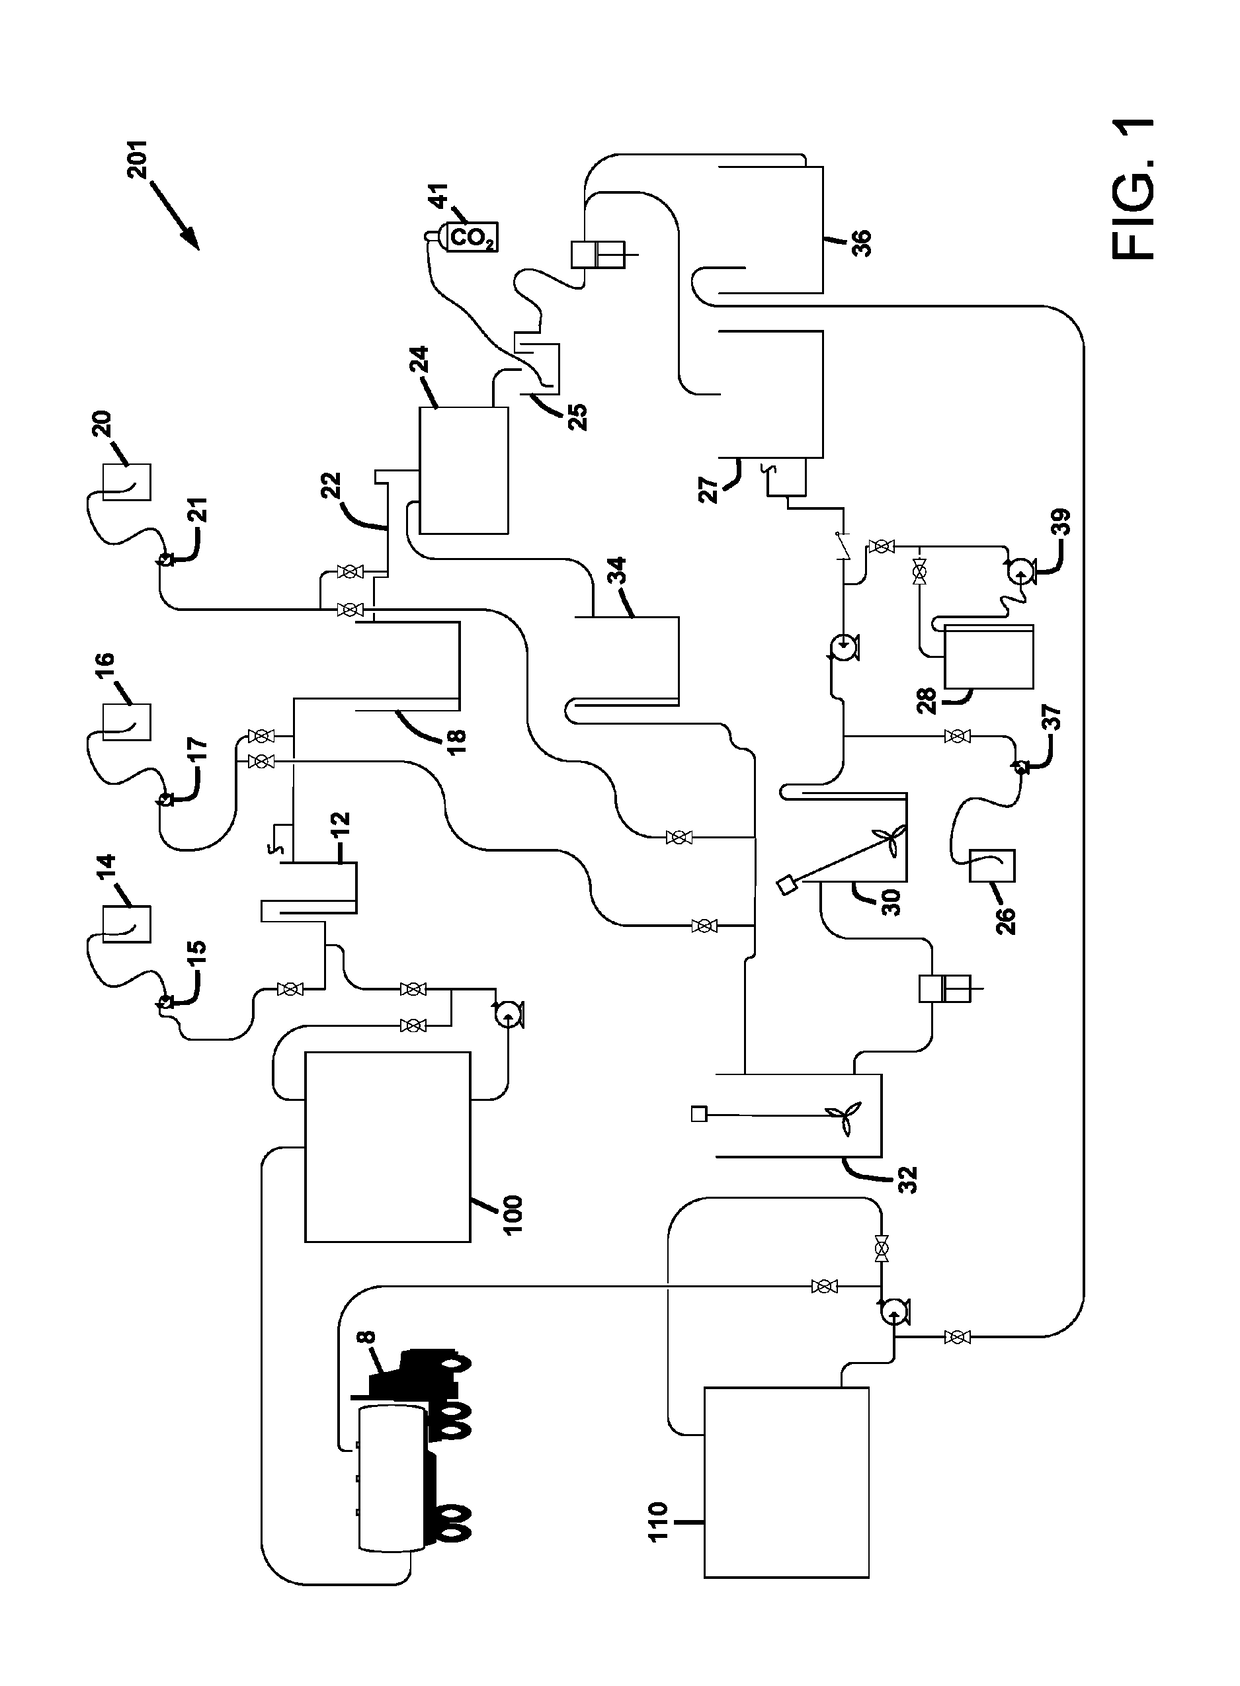 Method for treating fracture water for removal of contaminants at a wellhead